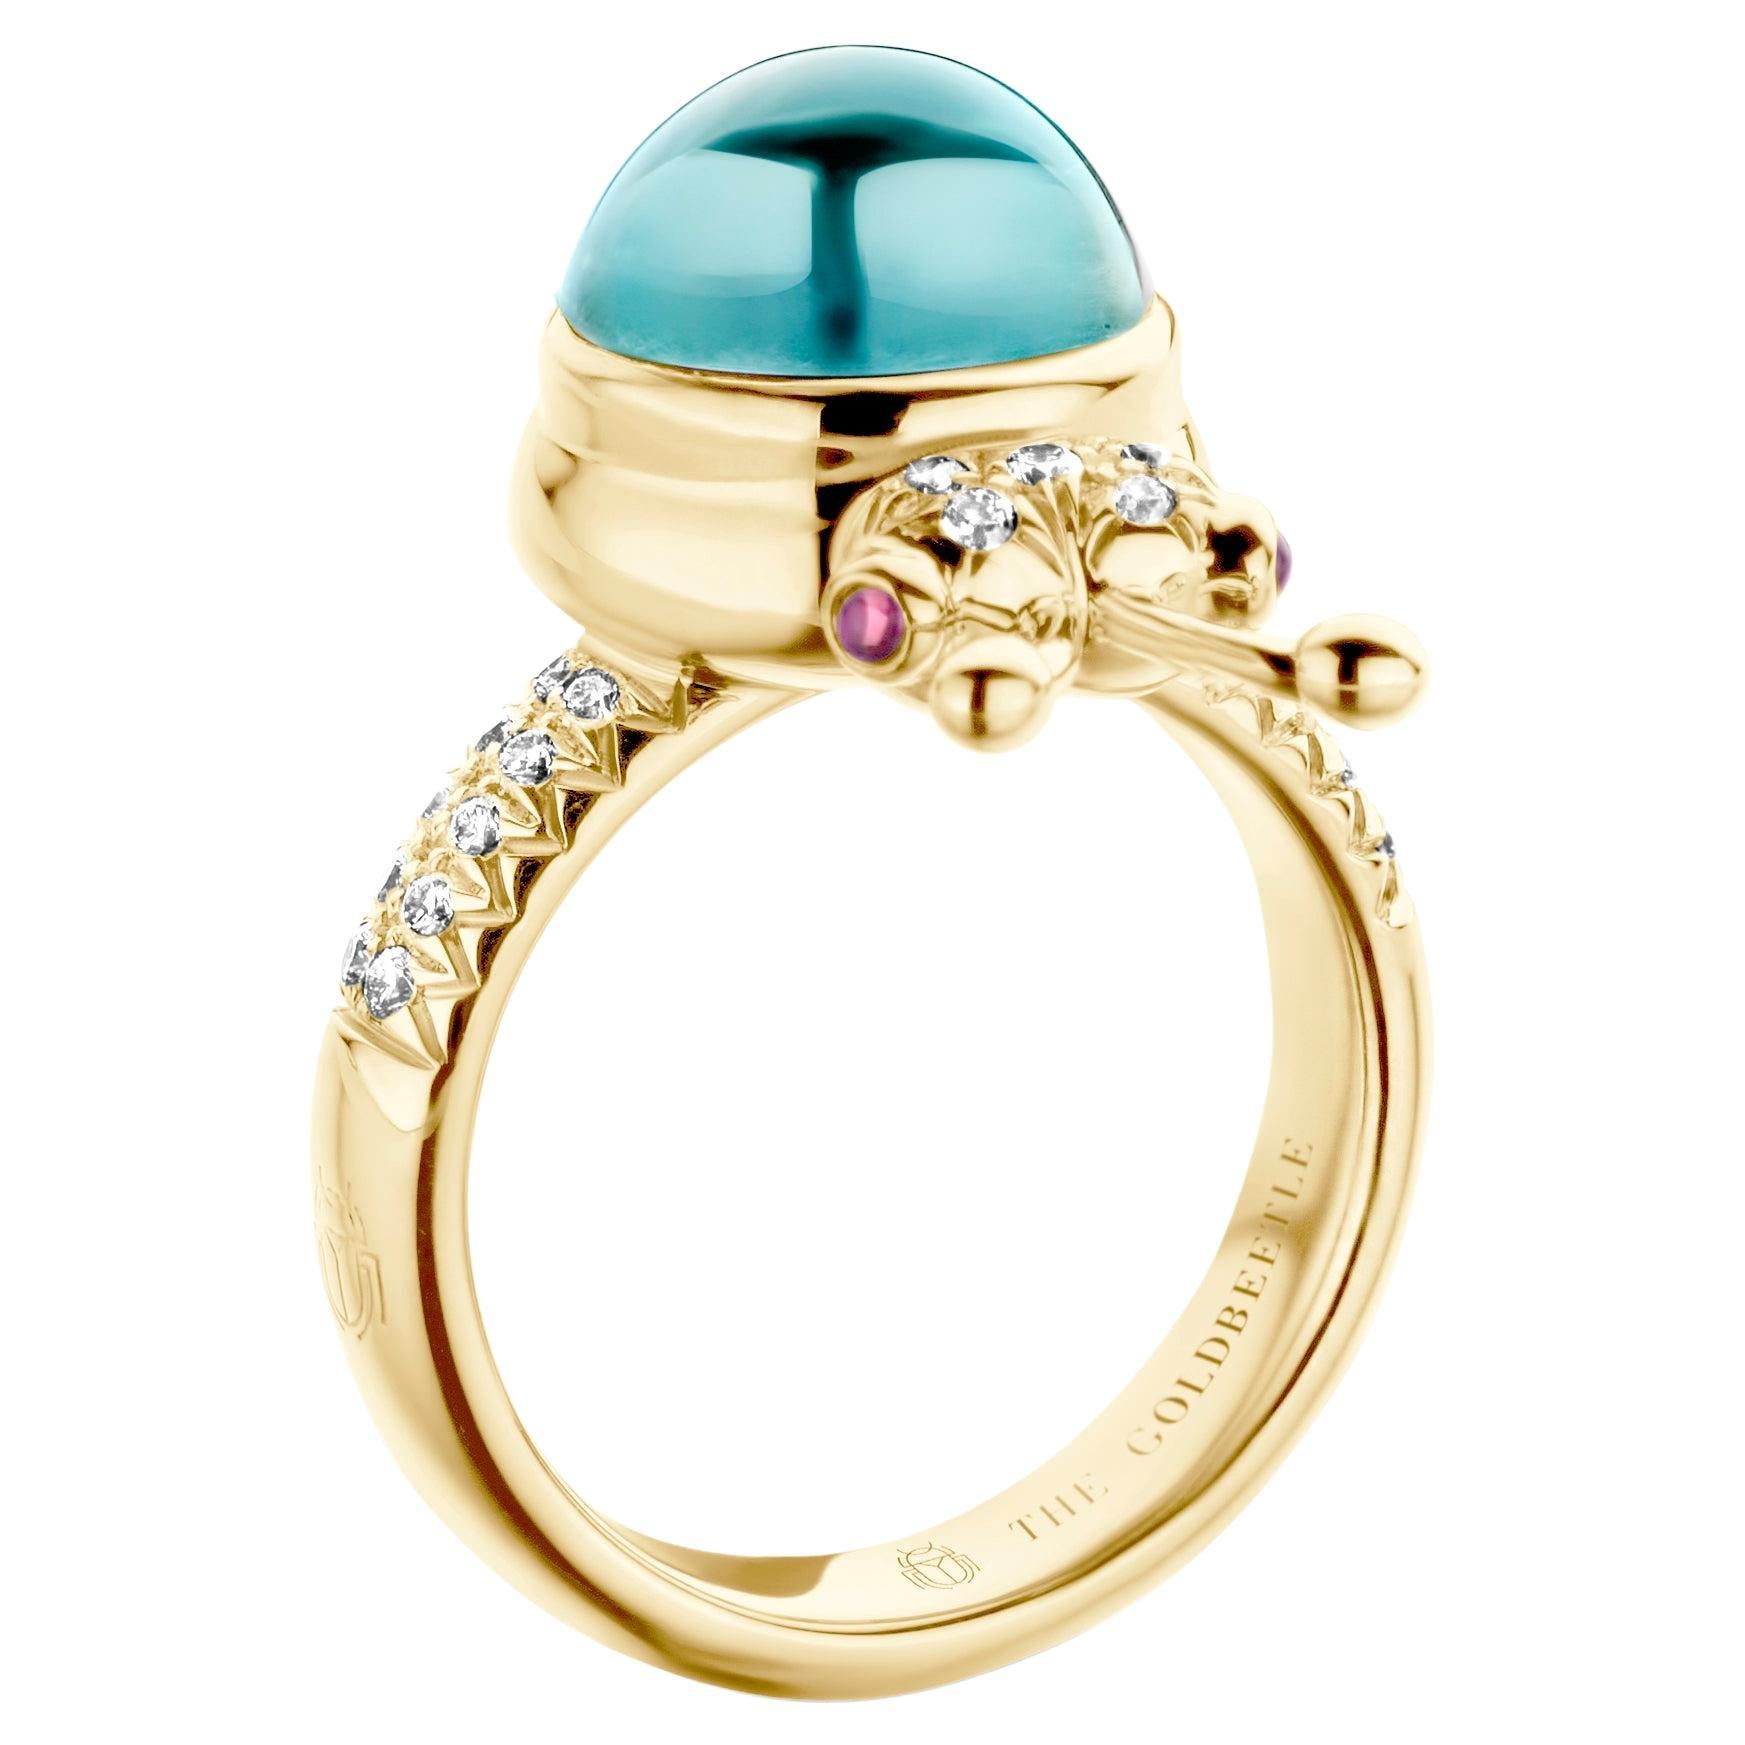 One-of-a-kind lucky beetle ring in 18-Karat yellow gold 10g set with the finest natural diamonds in brilliant cut 0,23 Carat (VVS/DEF quality) one natural, Aquamarine in round cabochon cut 6,00 Carat and two pink tourmalines in round cabochon cut.